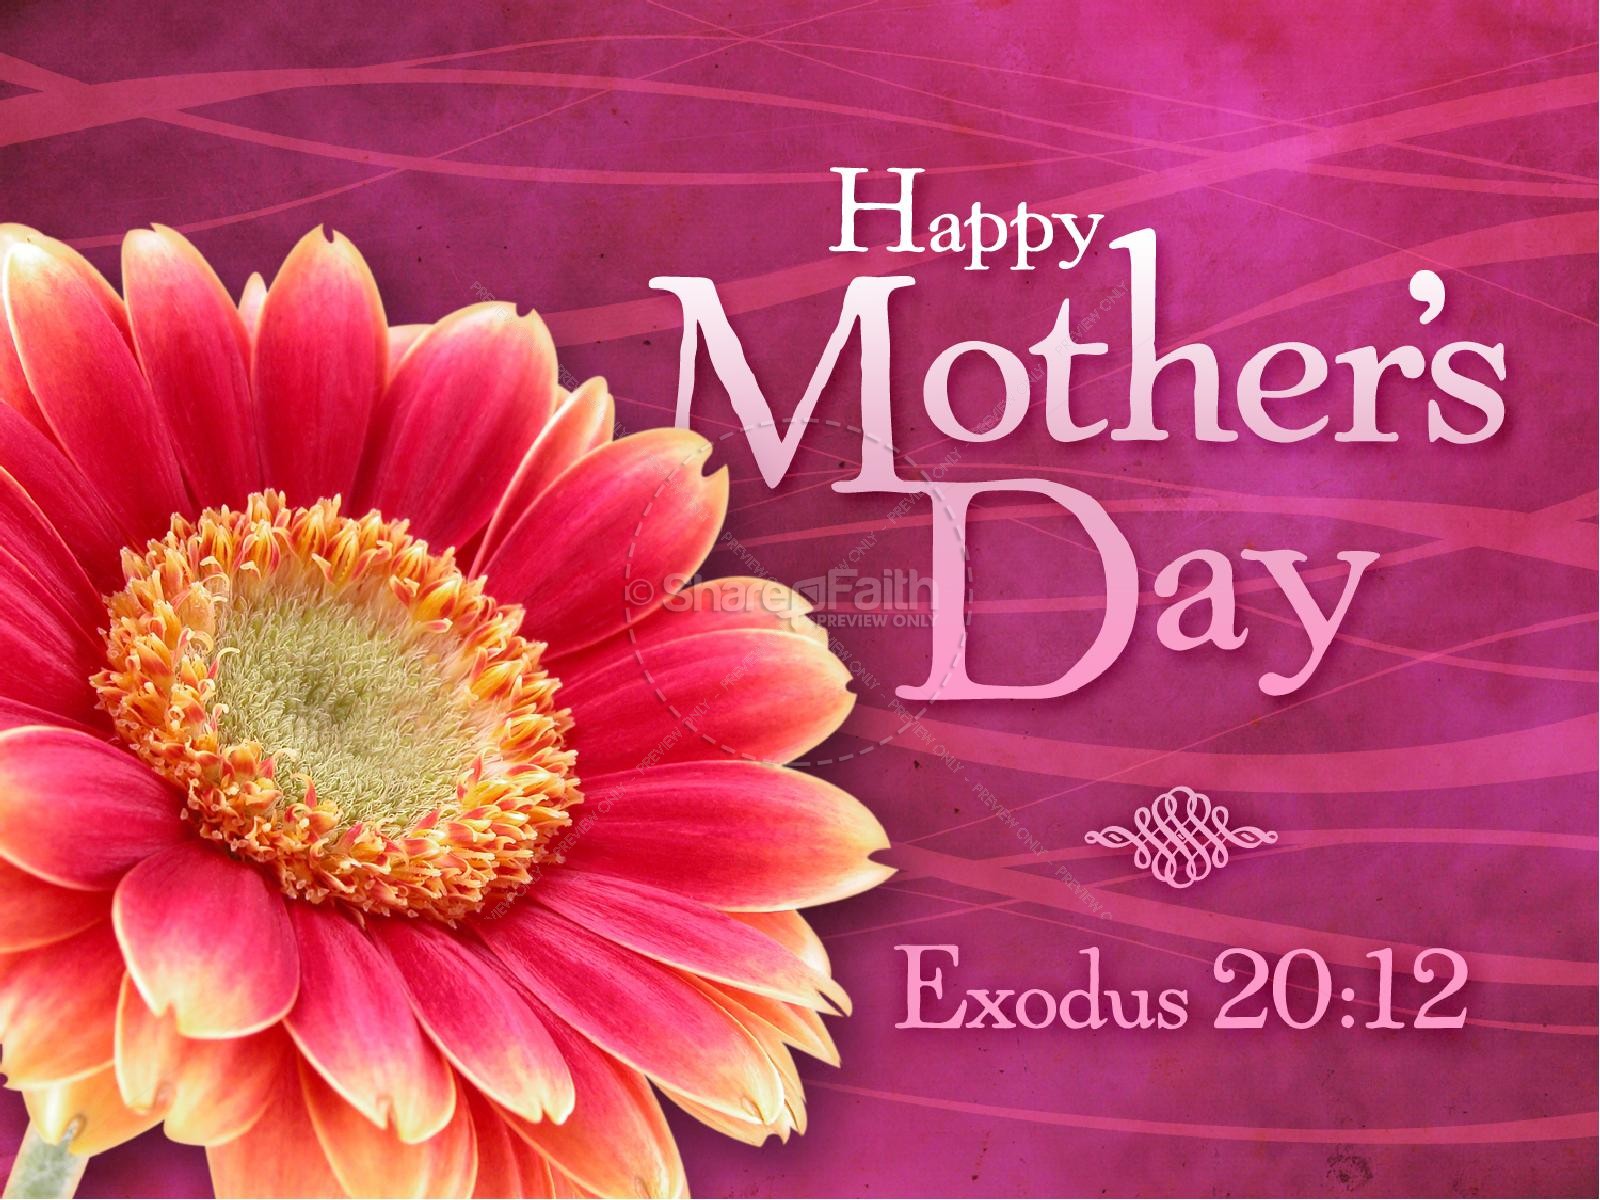 christian clip art for mother's day - photo #33